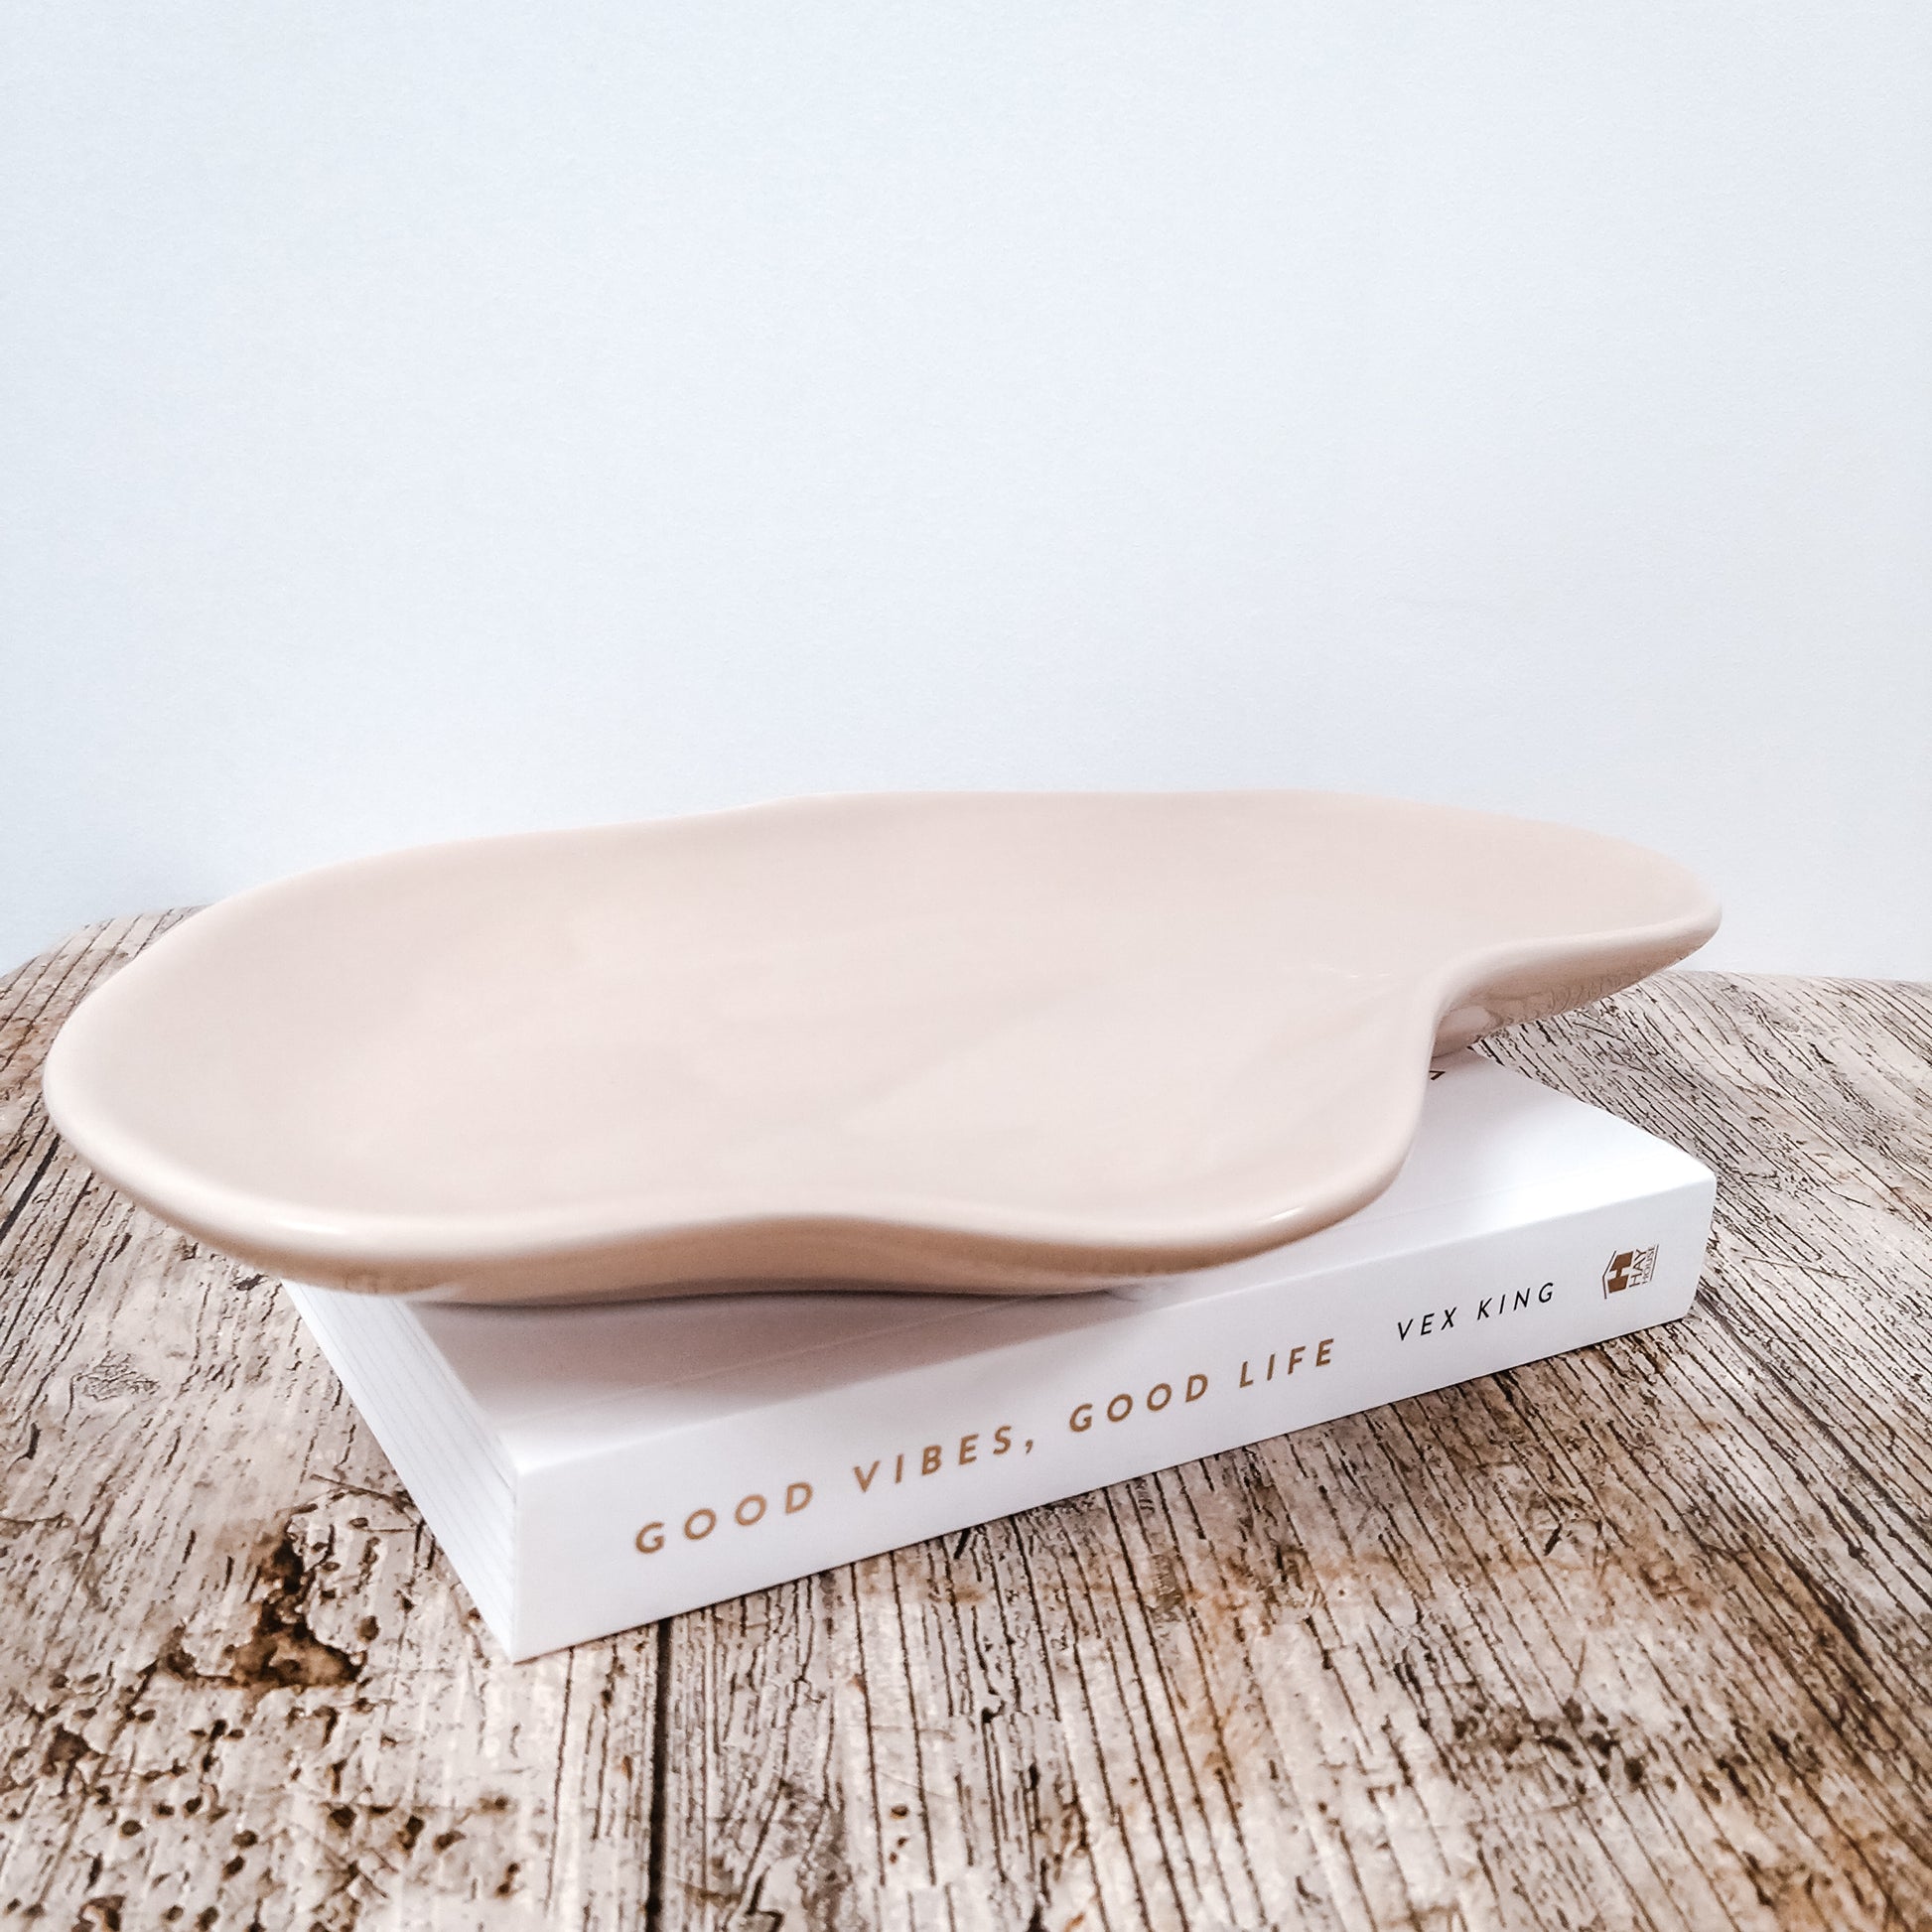 Lille ceramic styling plate in beige